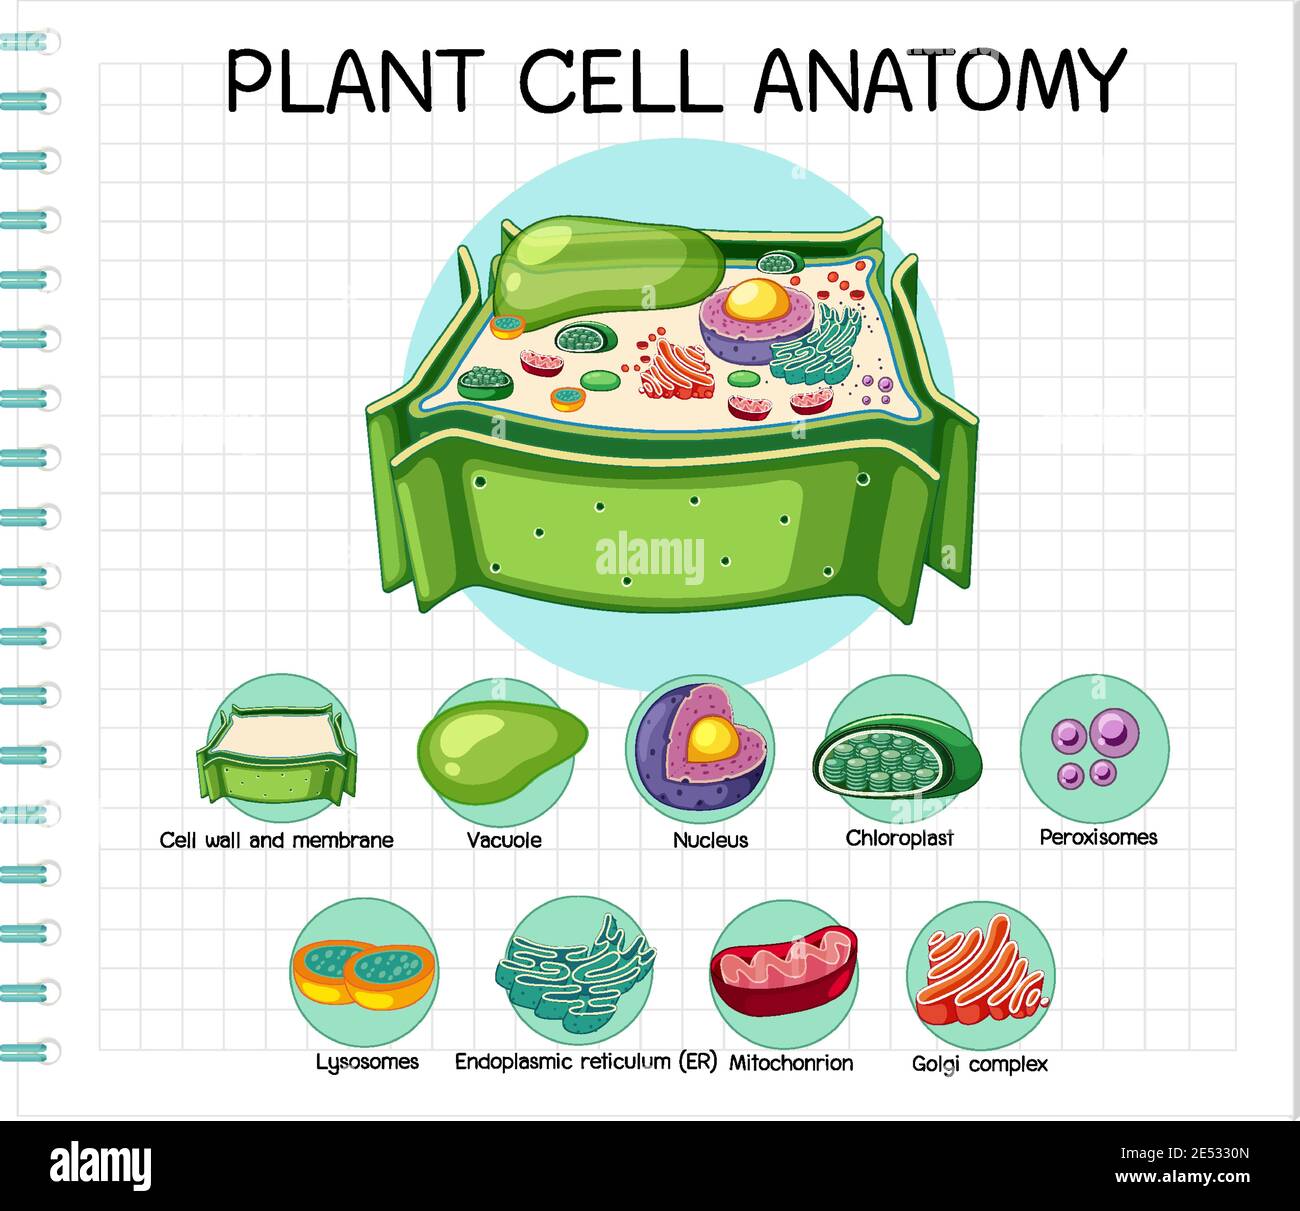 Anatomy of plant cell (Biology Diagram) illustration Stock Vector